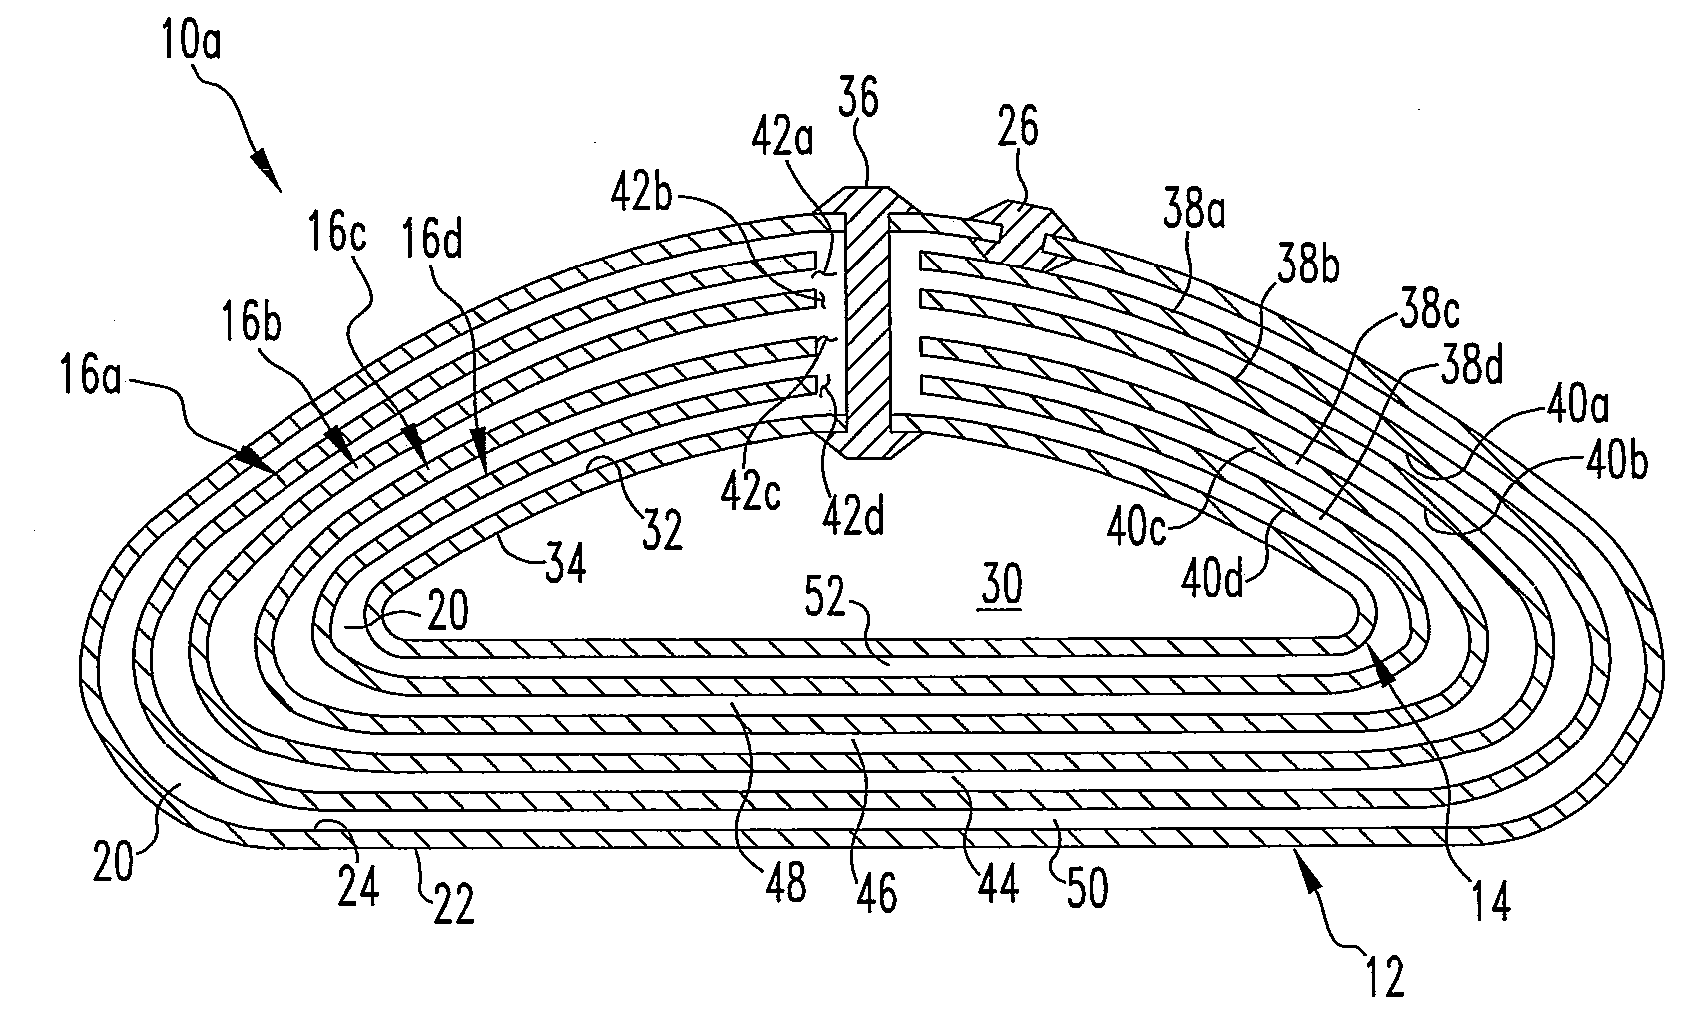 Breast Implant with Low Coefficient of Friction Between Internal Shells in an Aqueous Fluid Environment